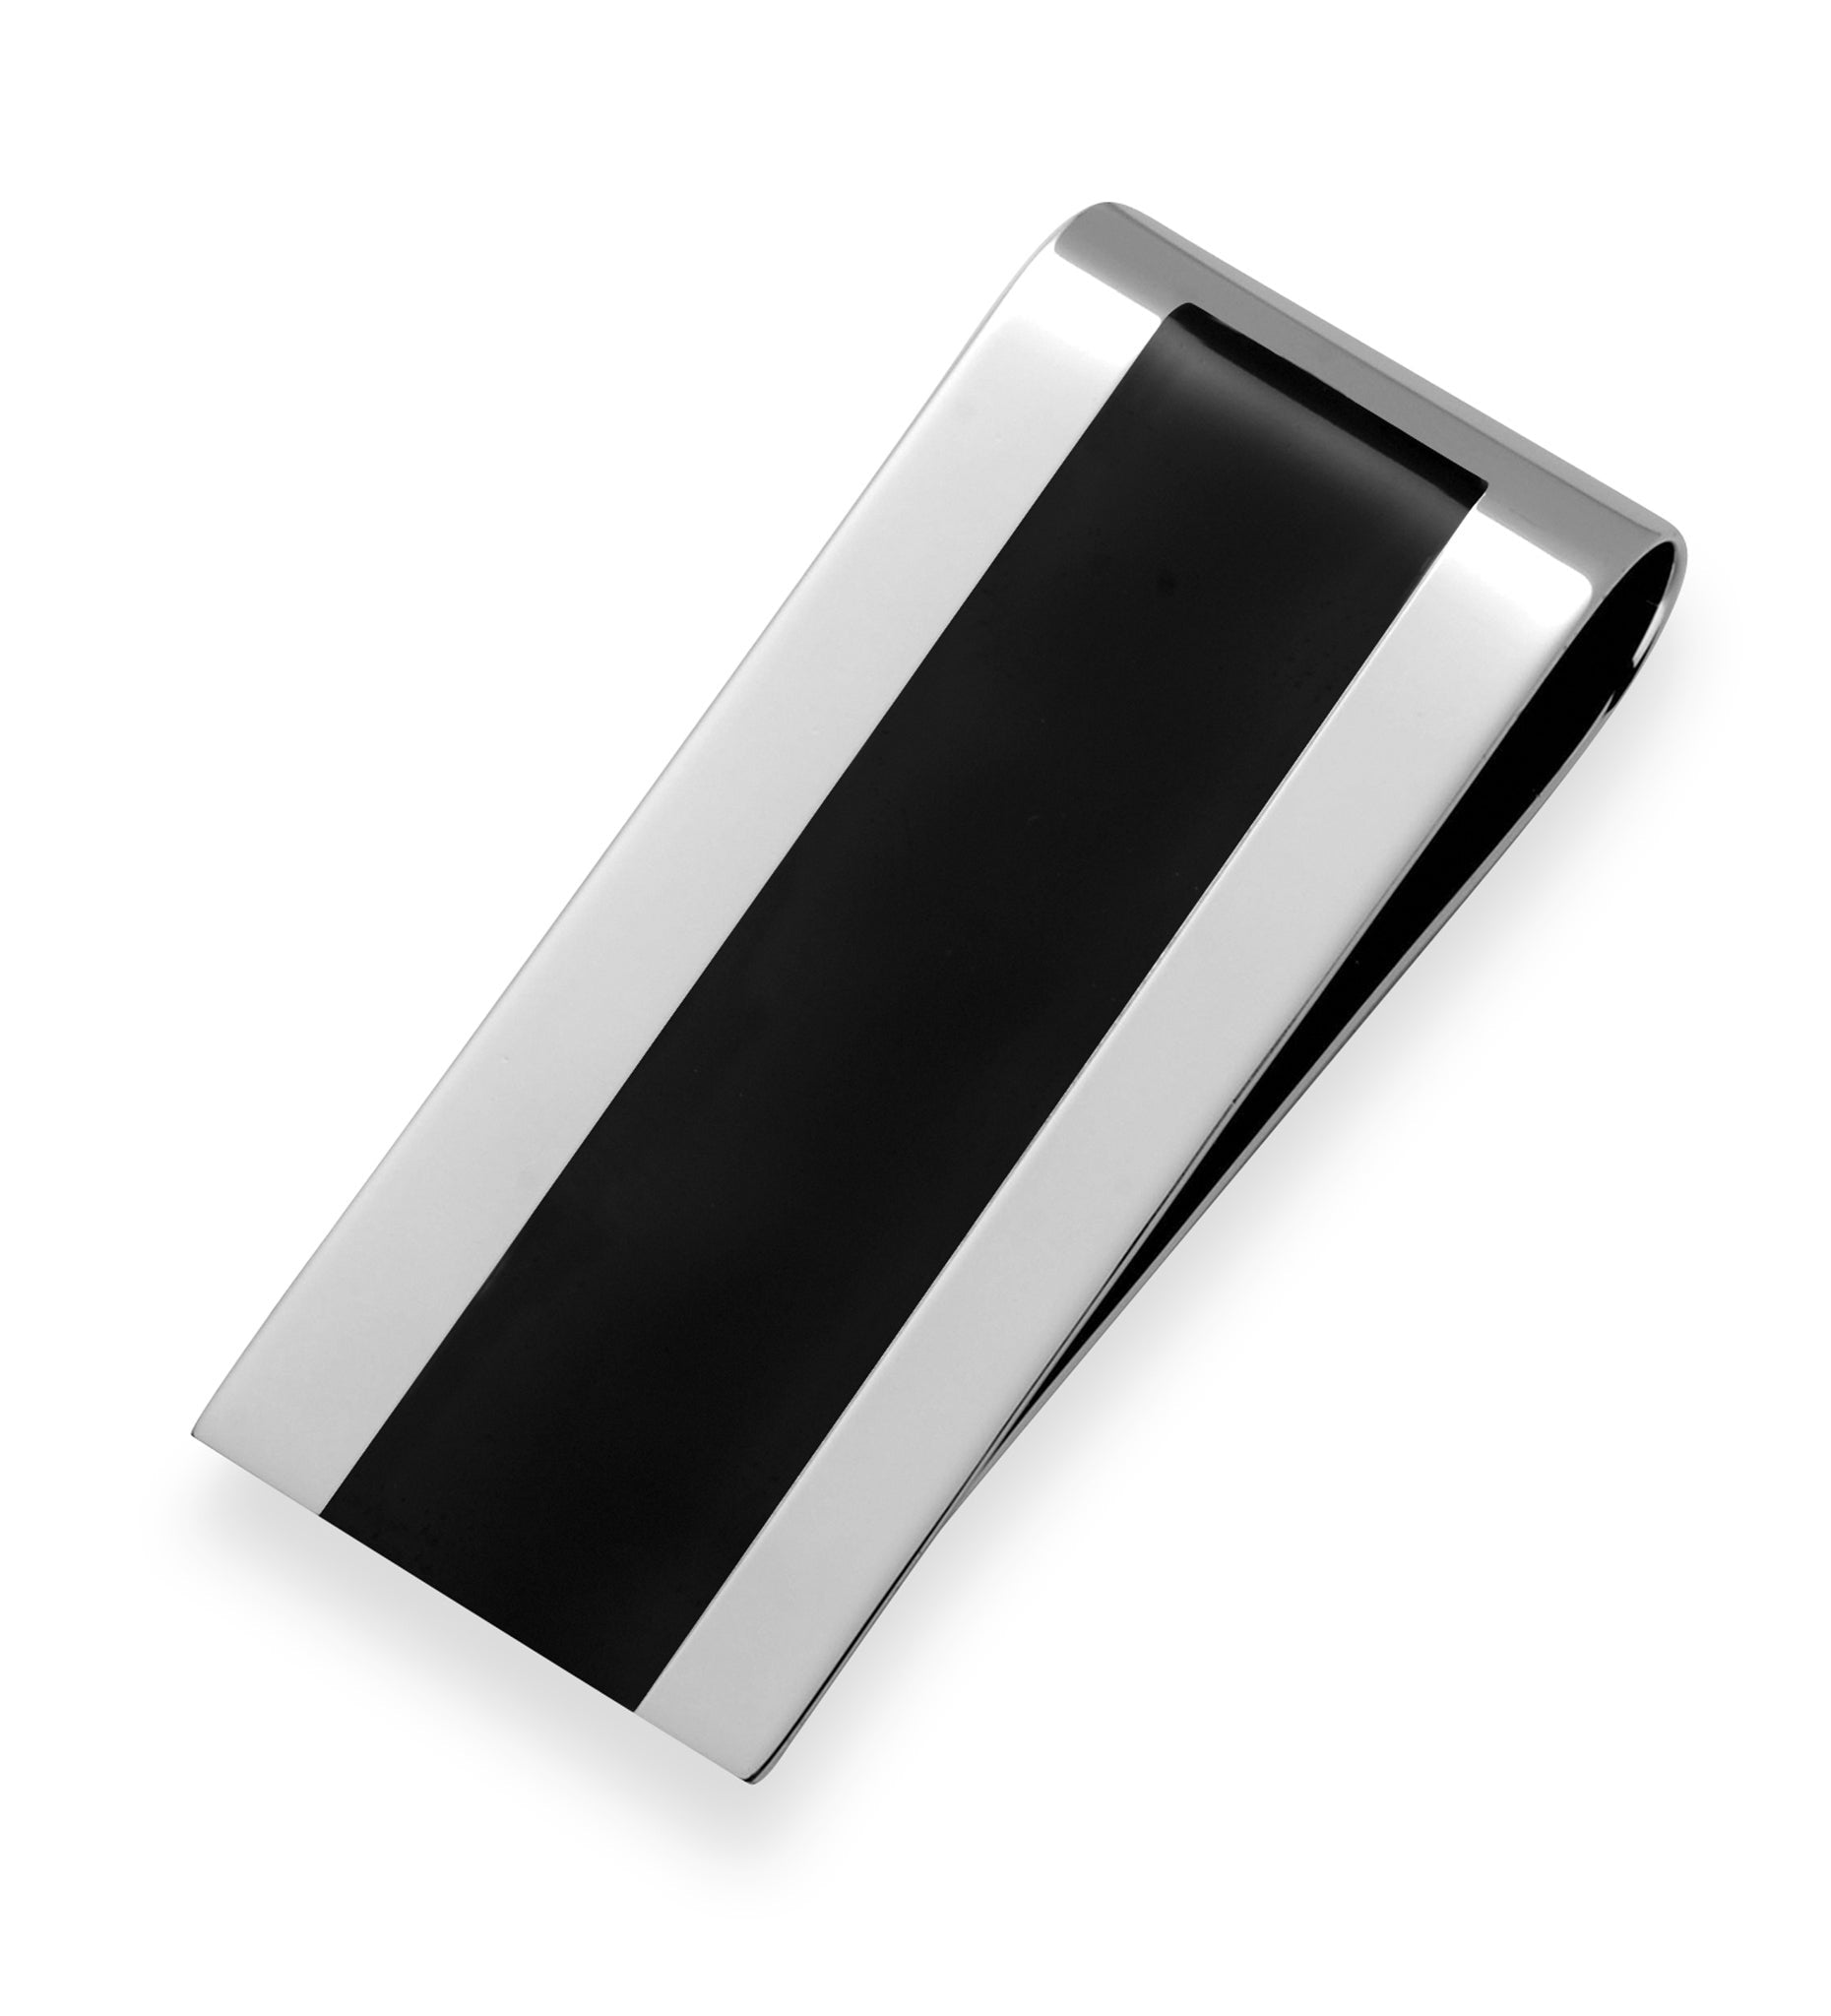 A stainless steel money clip with black center stripe displayed on a neutral white background.